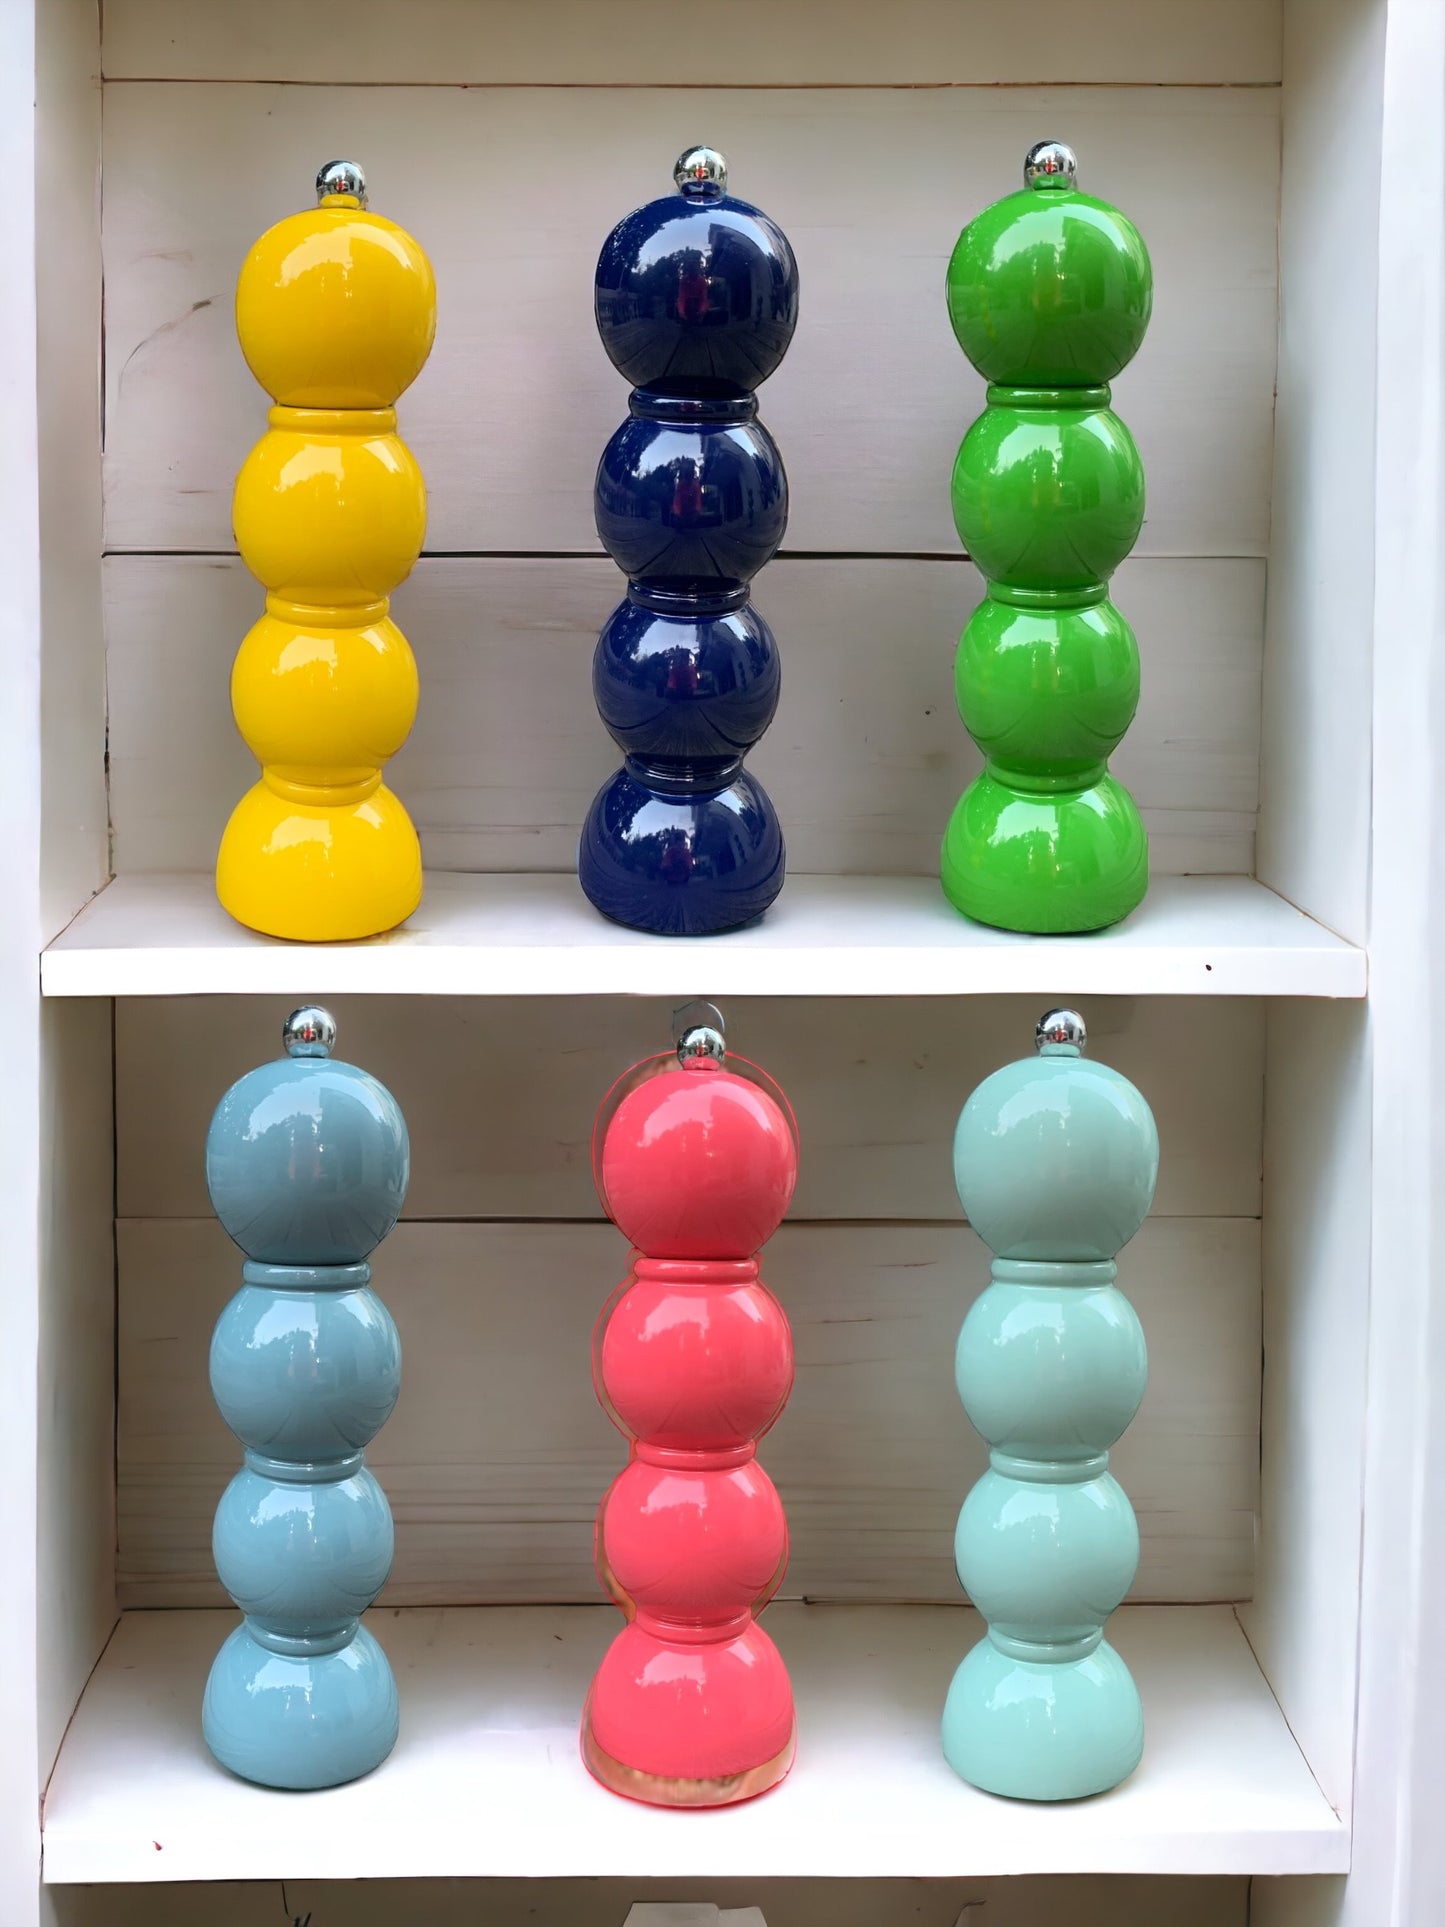 A collection of 6 brightly coloured bobbin pepper grinders on a shelf.